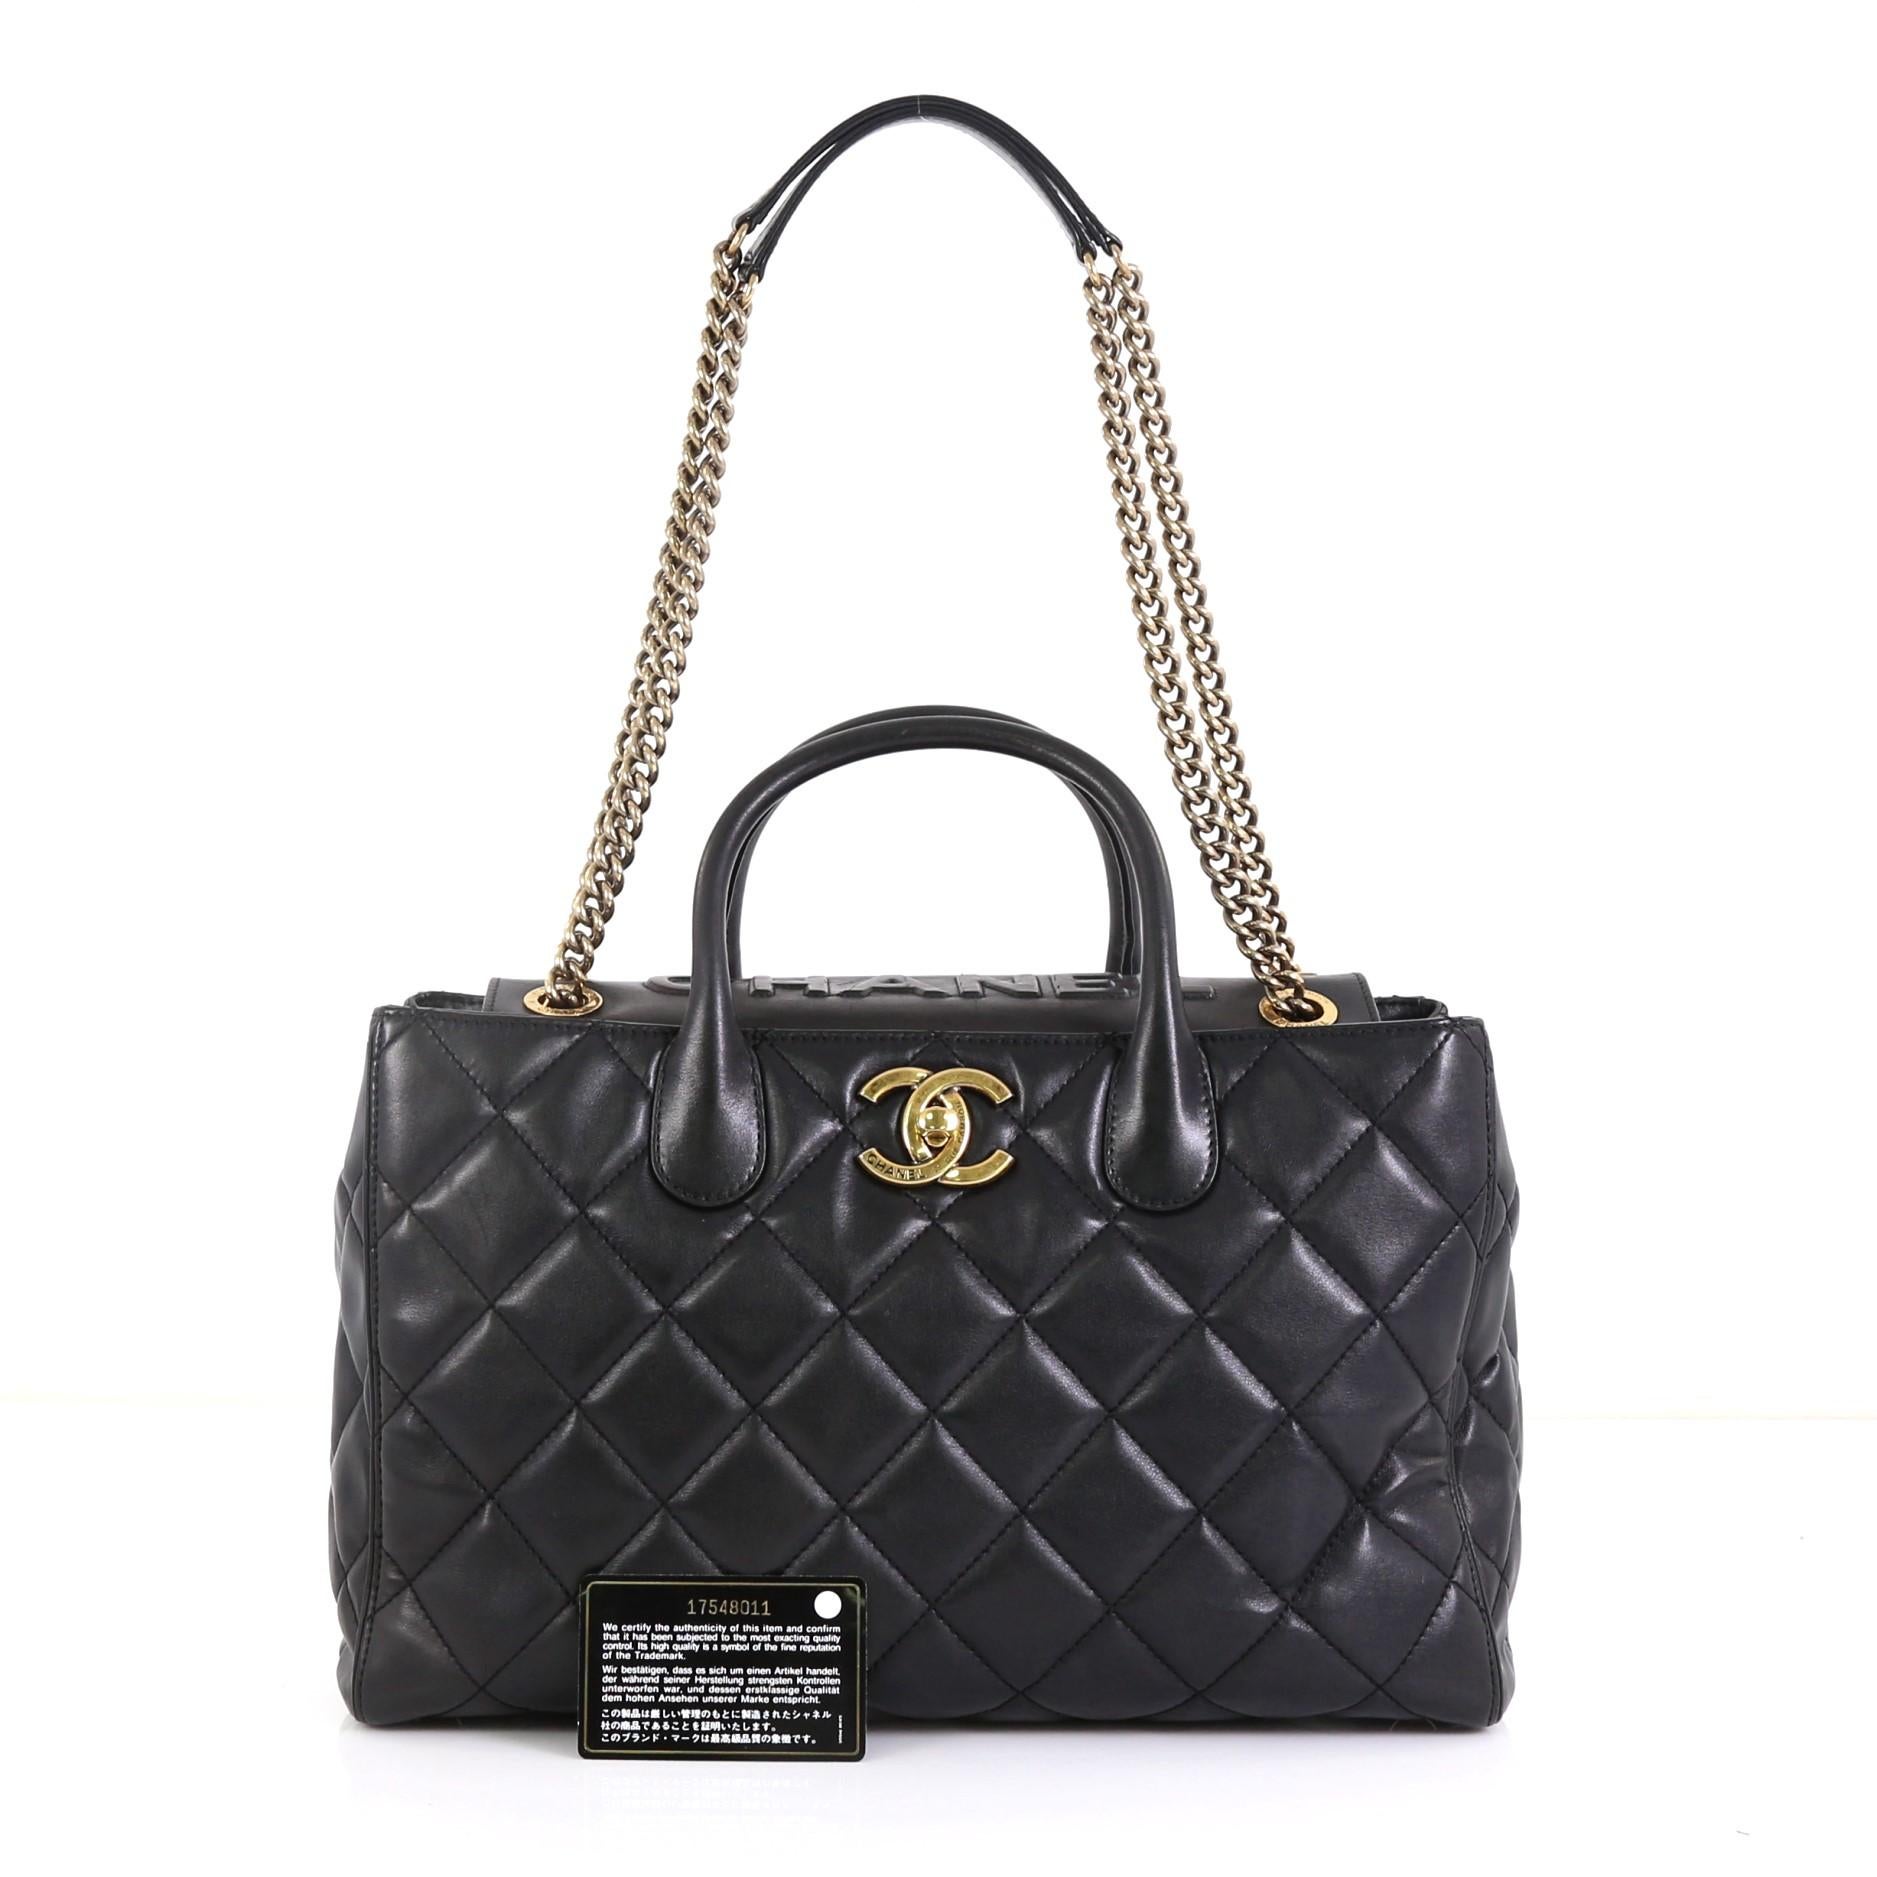 This Chanel Portobello Logo Tote Quilted Lambskin Medium, crafted from black quilted lambskin leather, features dual rolled handles, chain strap with leather pad, and aged gold-tone hardware. Its CC turn-lock closure opens to a gold leather interior